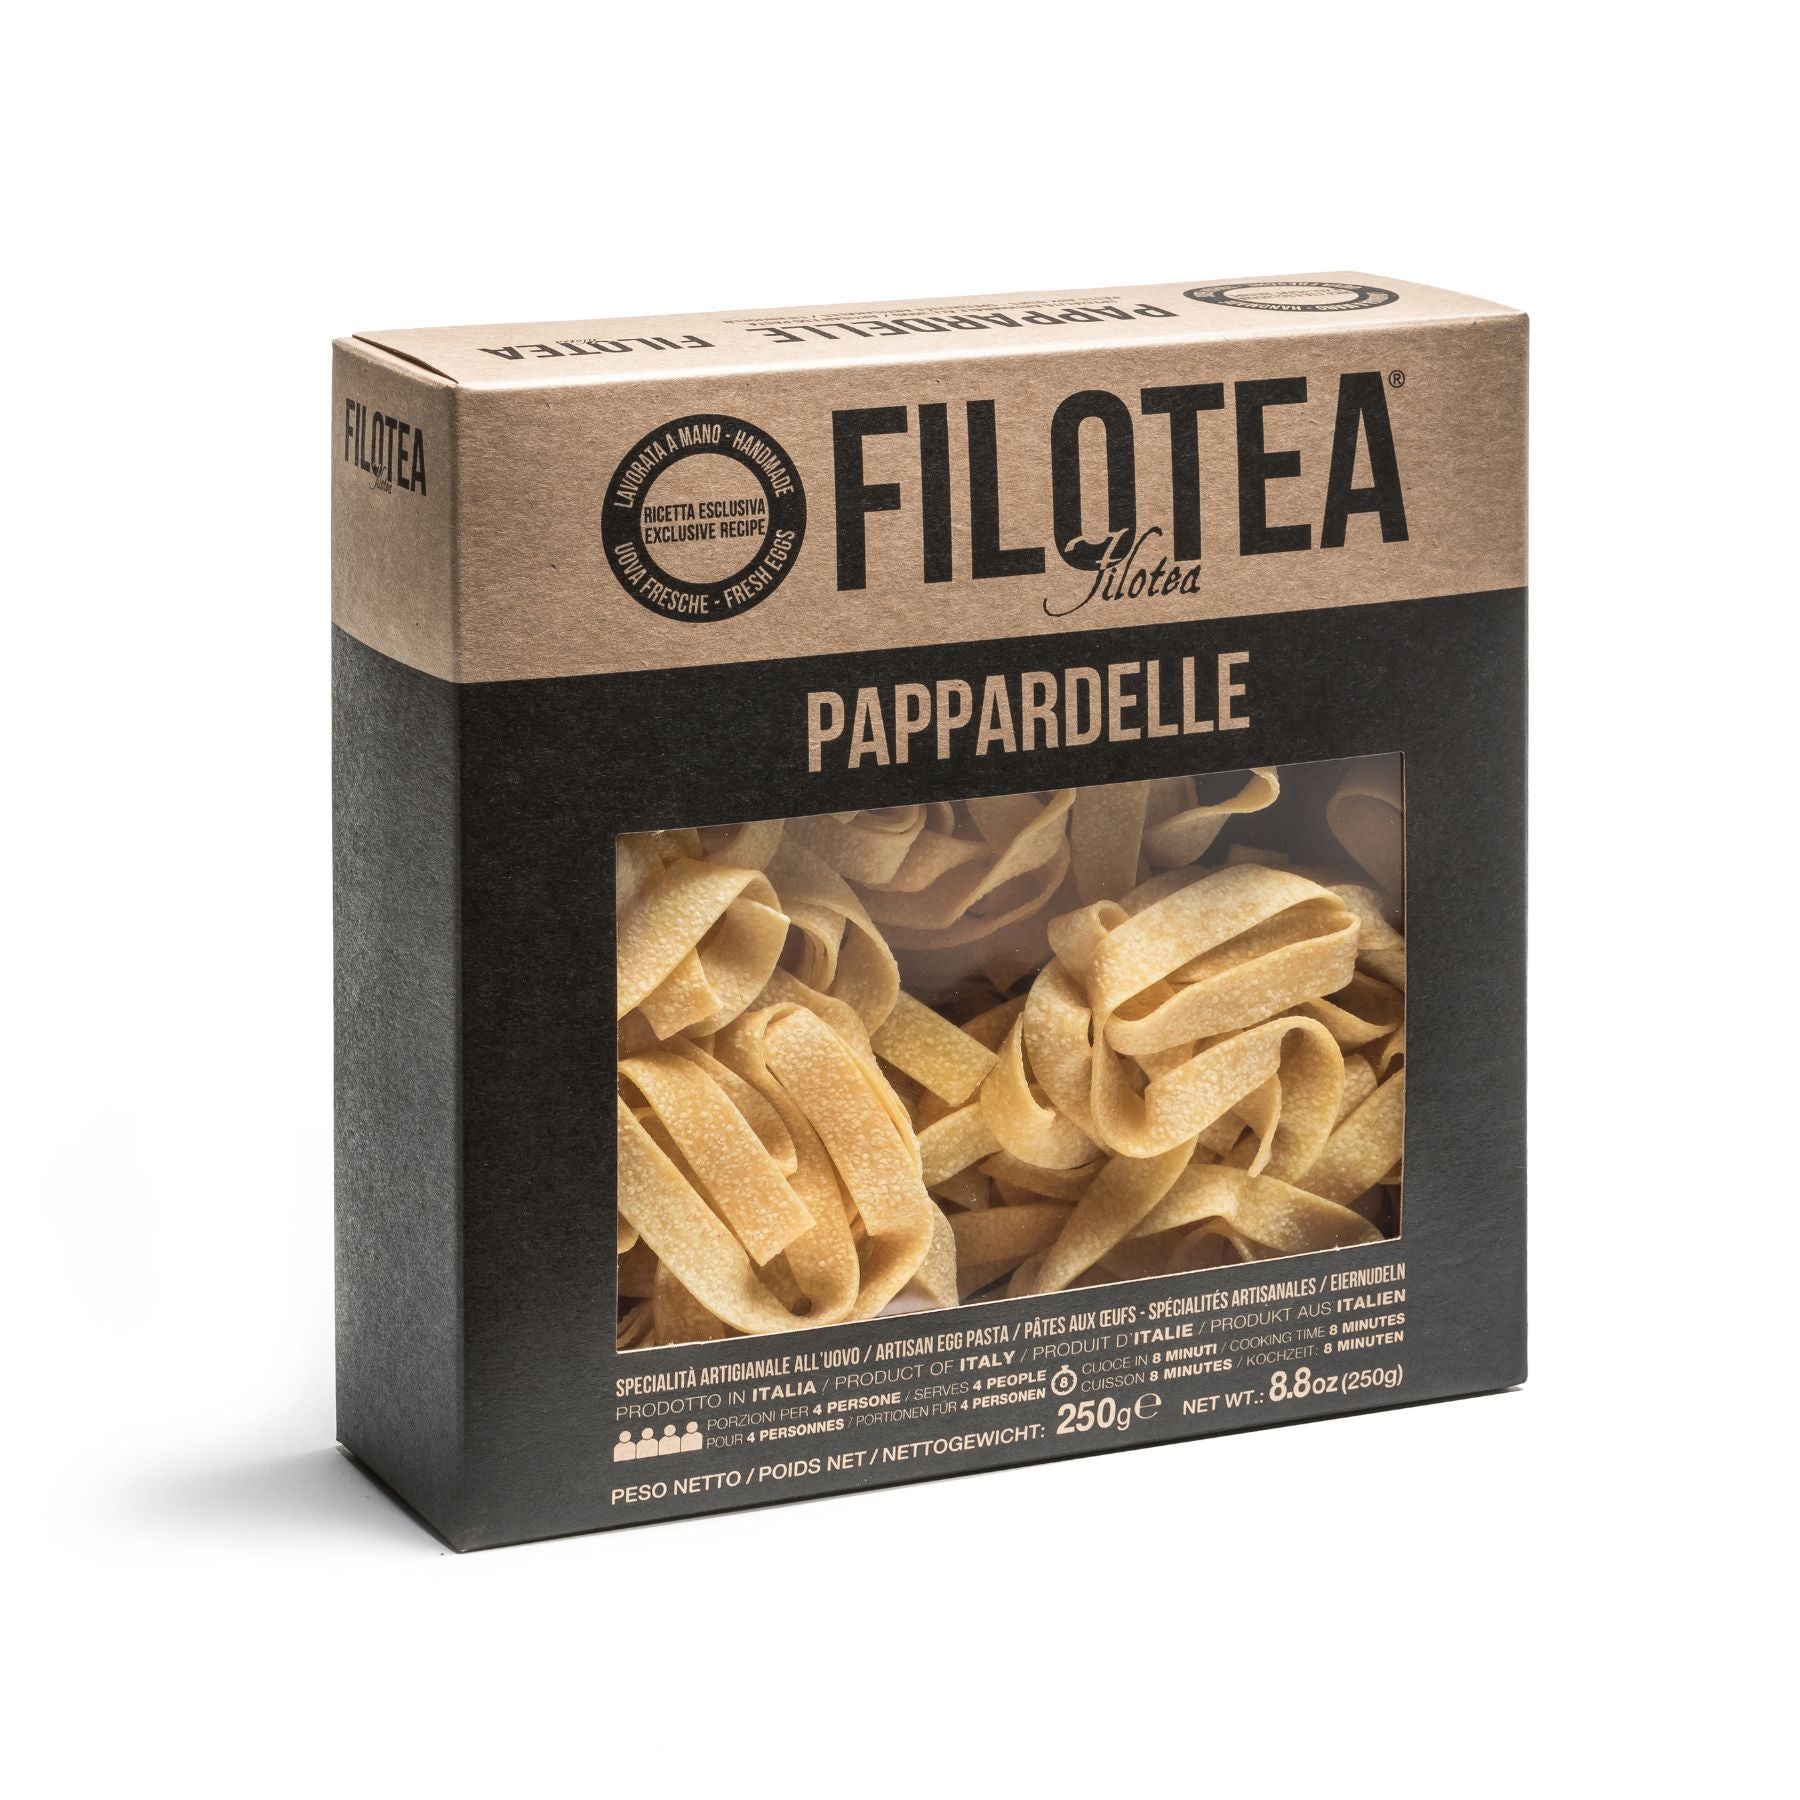 Filotea Le Matassine Pappardelle Nest Artisan Egg Pasta 250g | Imported and distributed in the UK by Just Gourmet Foods